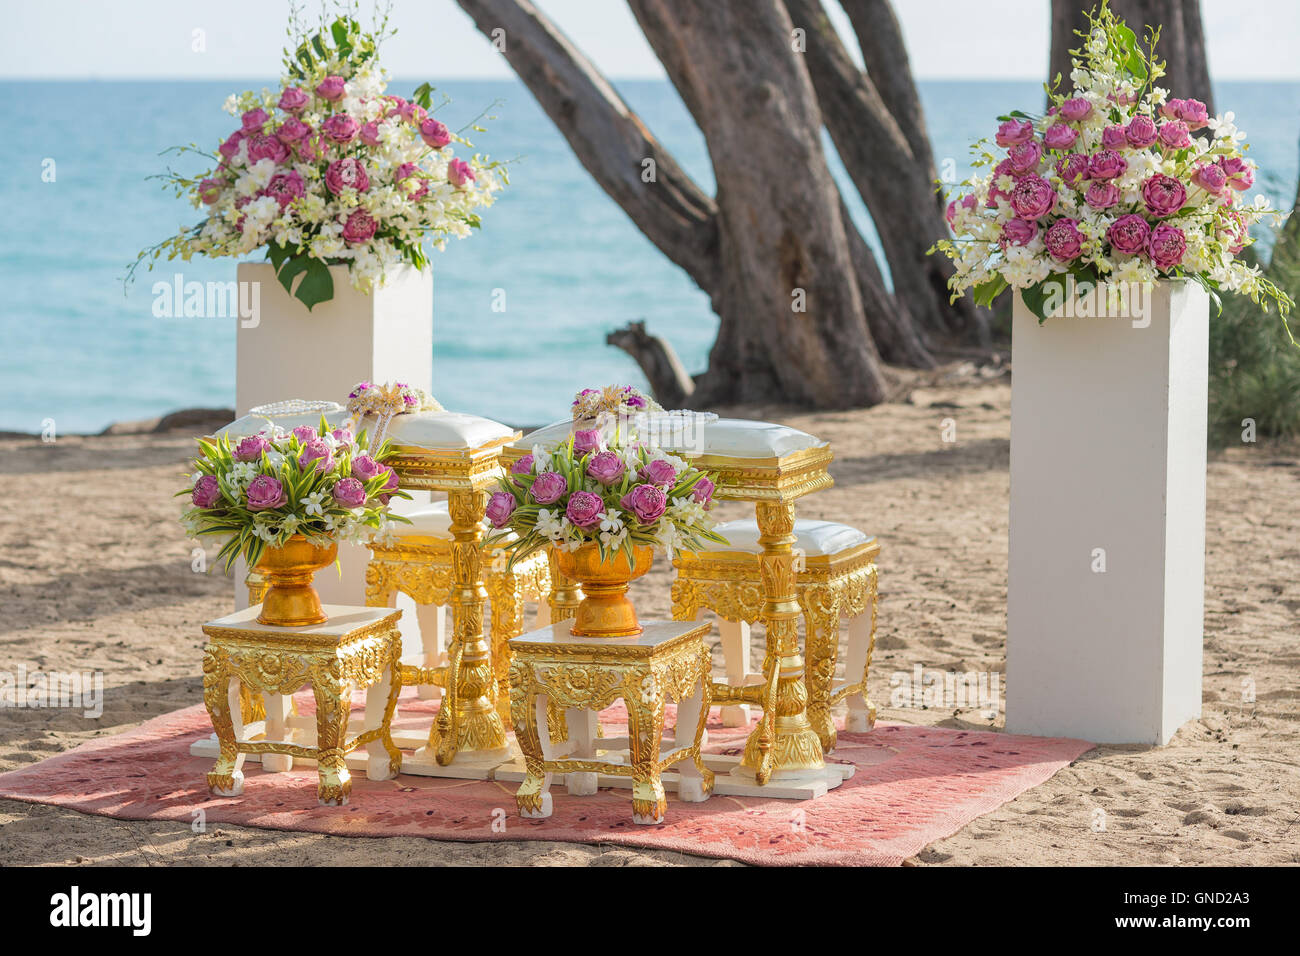 Setup for hand pouring in thai wedding ceremony at the beach front. Stock Photo